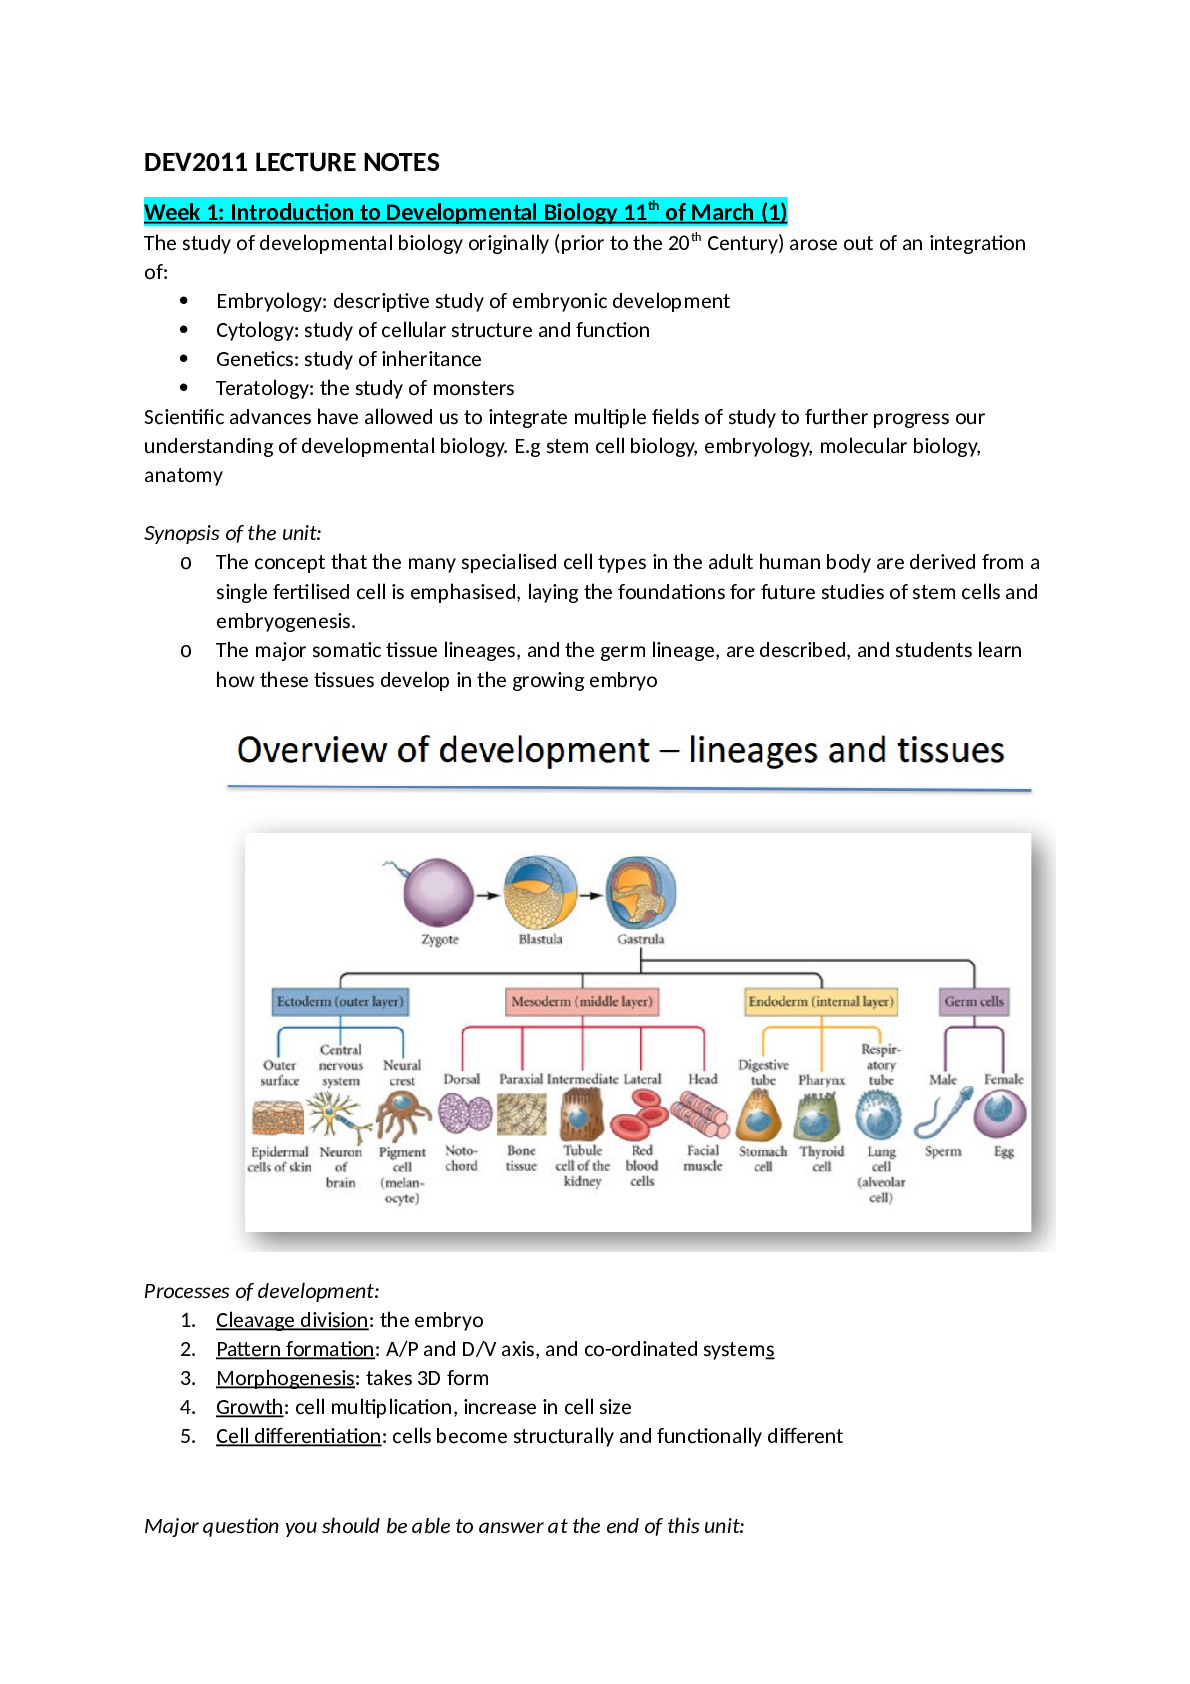 DEV2011_LECTURE_NOTES.docx